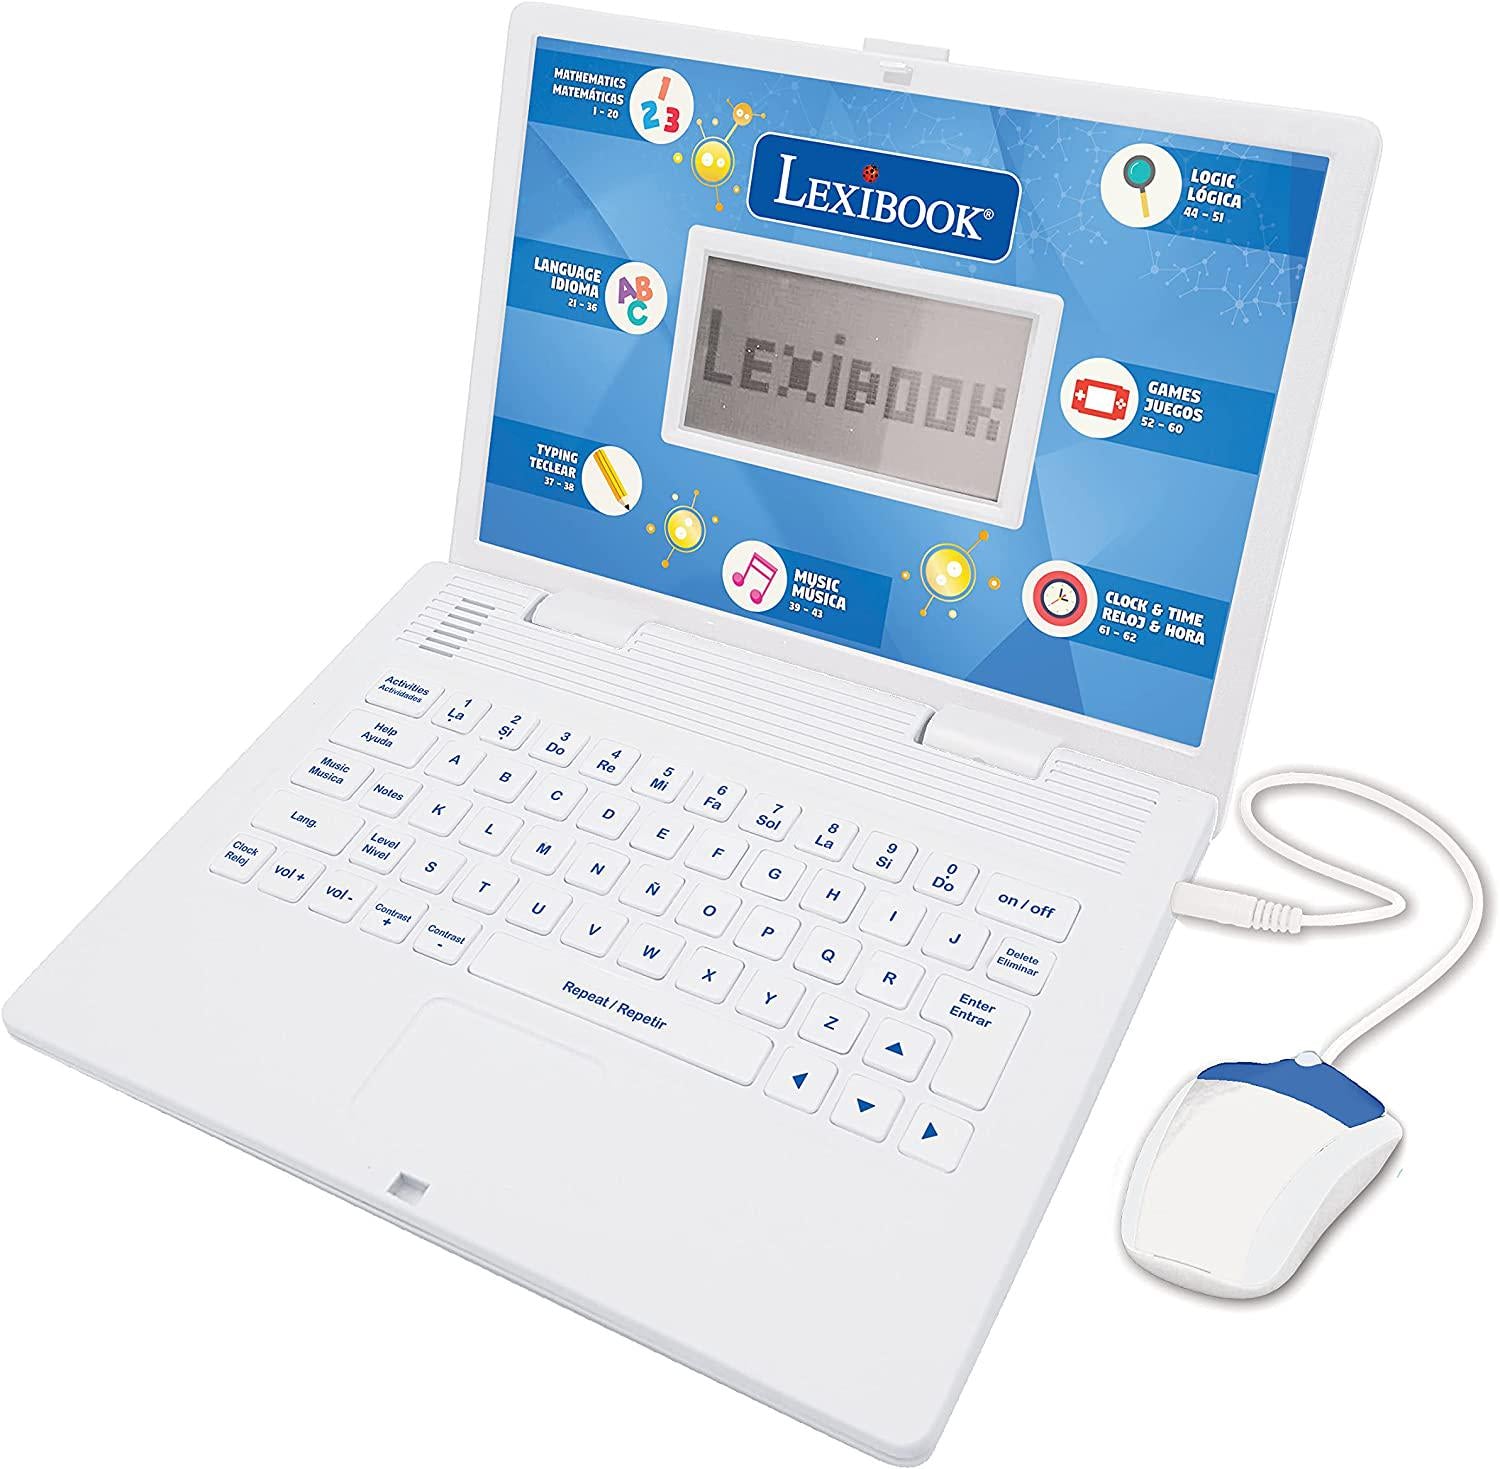 Lexibook, LEXiBOOK Educational and Bilingual Laptop Spanish/English - Toy for Children with 124 Activities to Learn Mathematics, Dactylography, Logic, Clock Reading, Play Games and Music - JC598i2